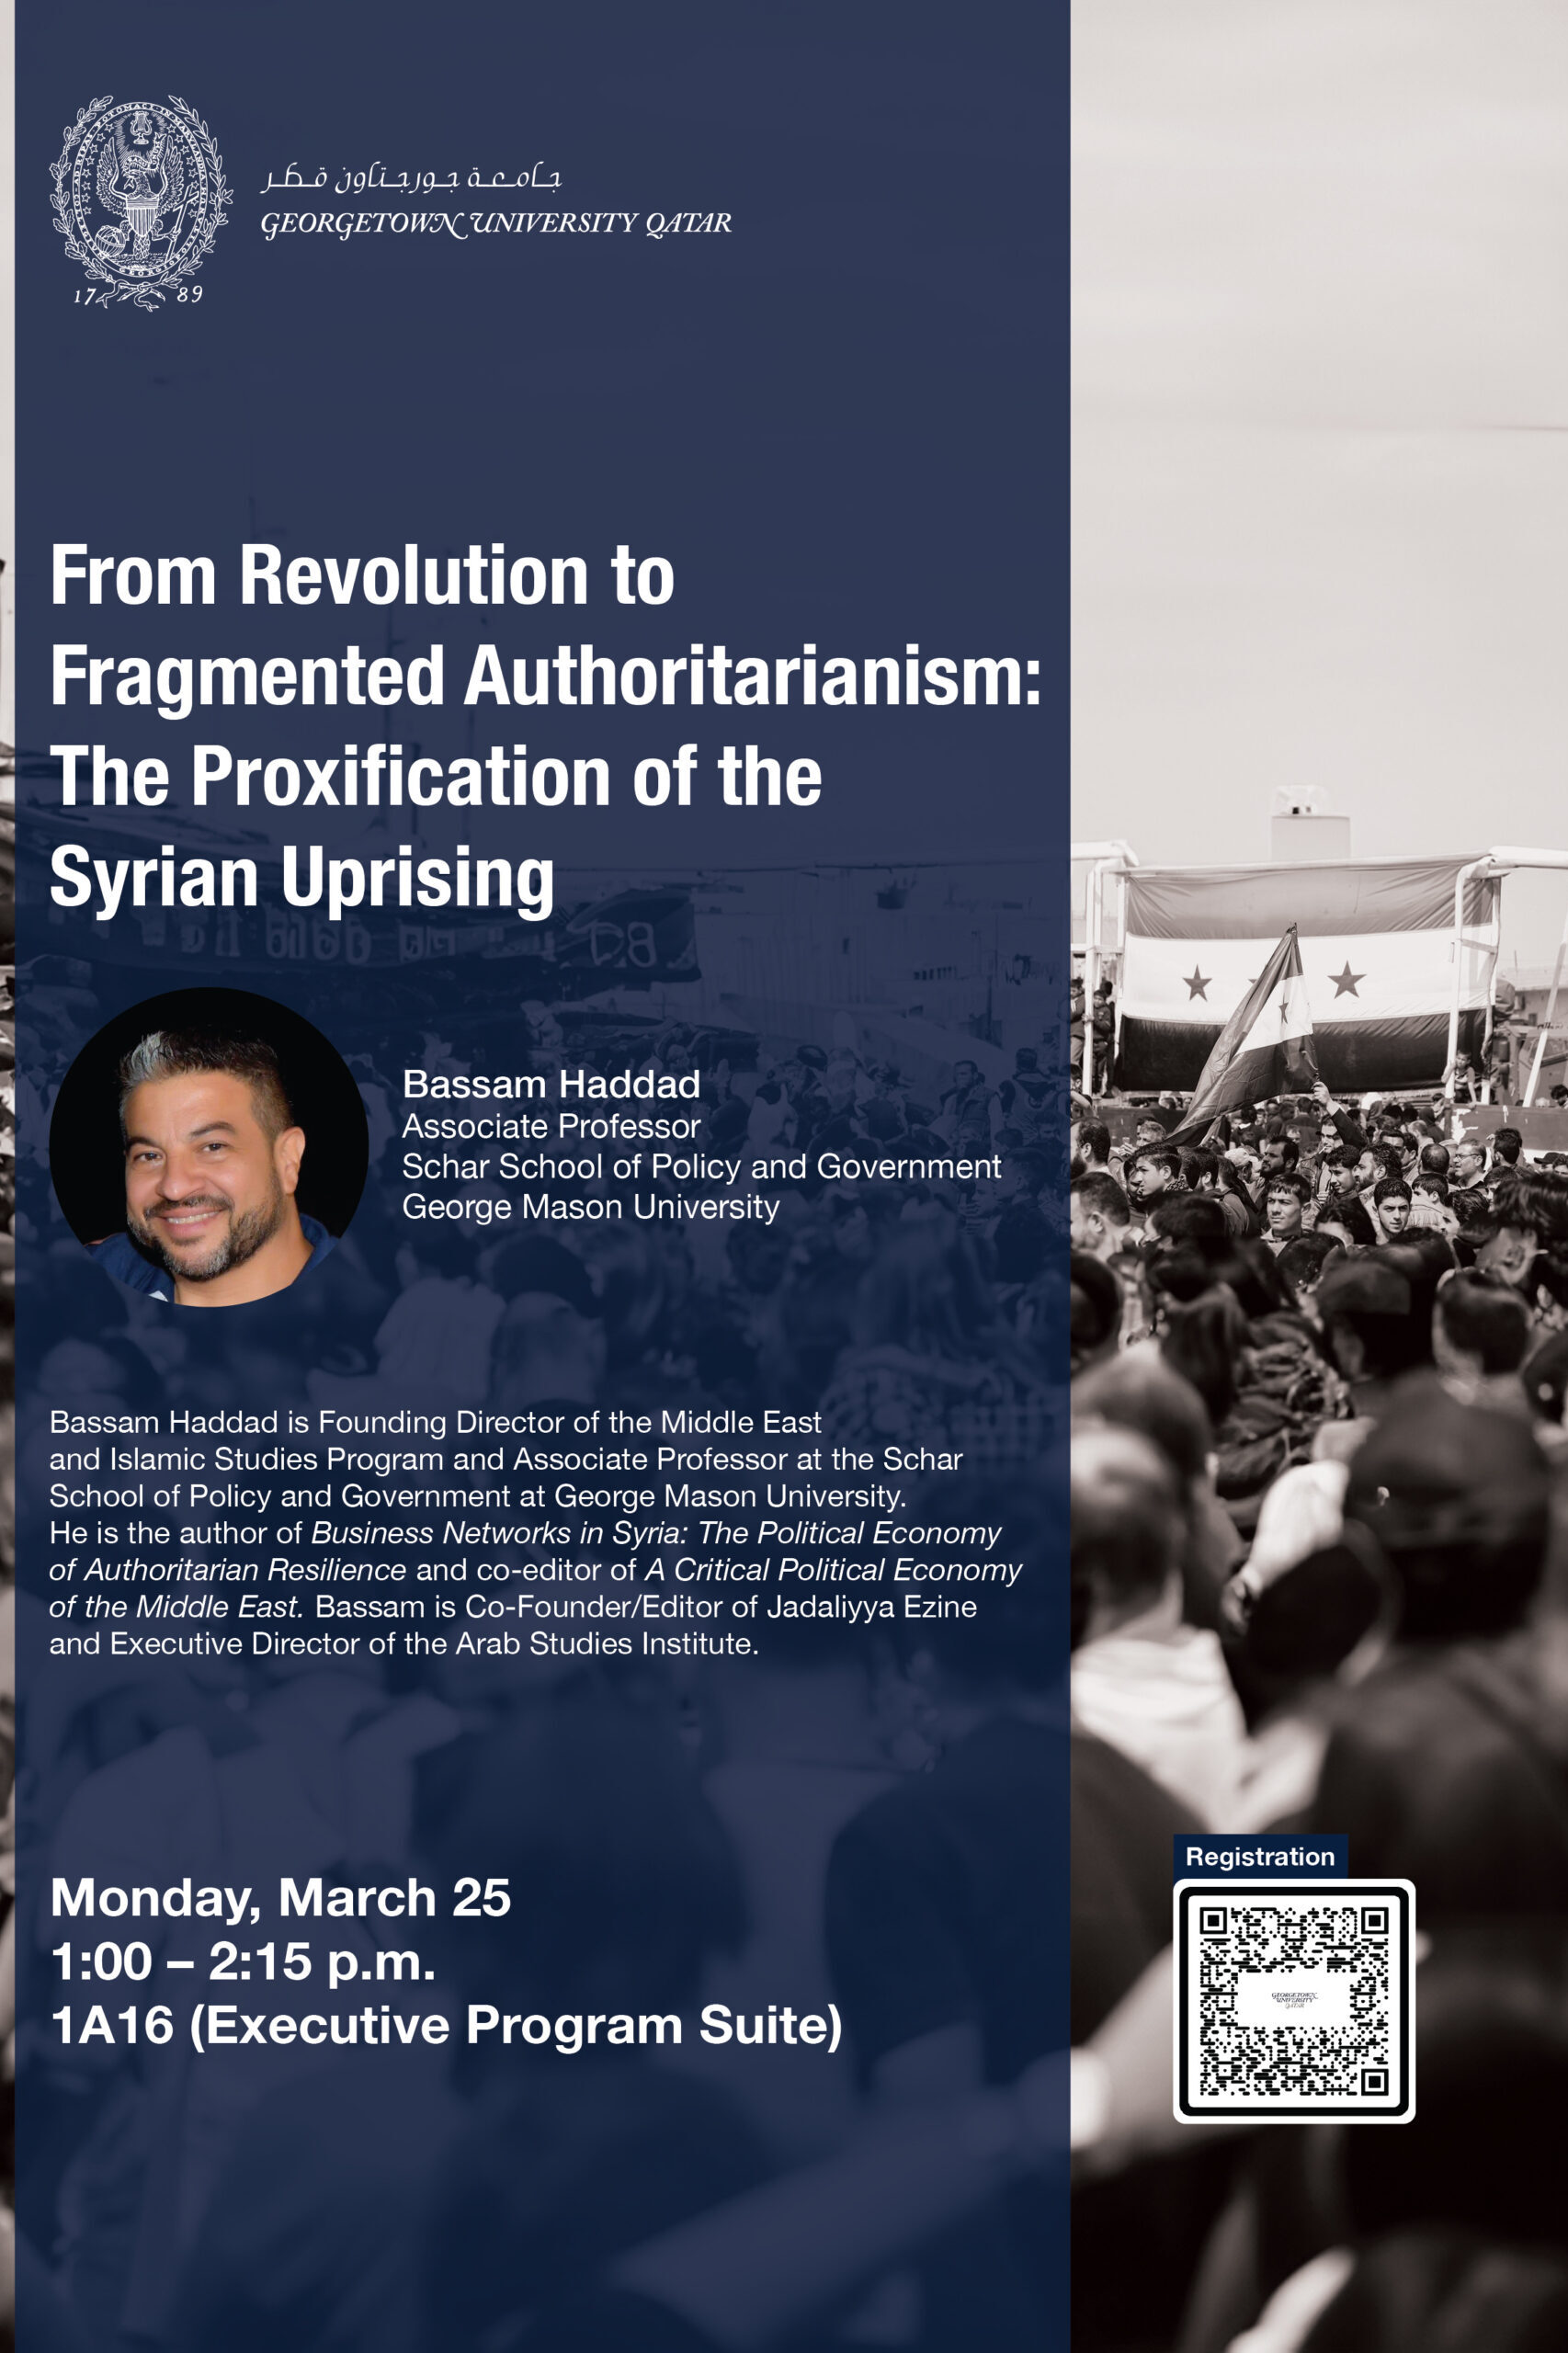 From Revolution to Fragmented Authoritarianism: The Proxification of the Syrian Uprising